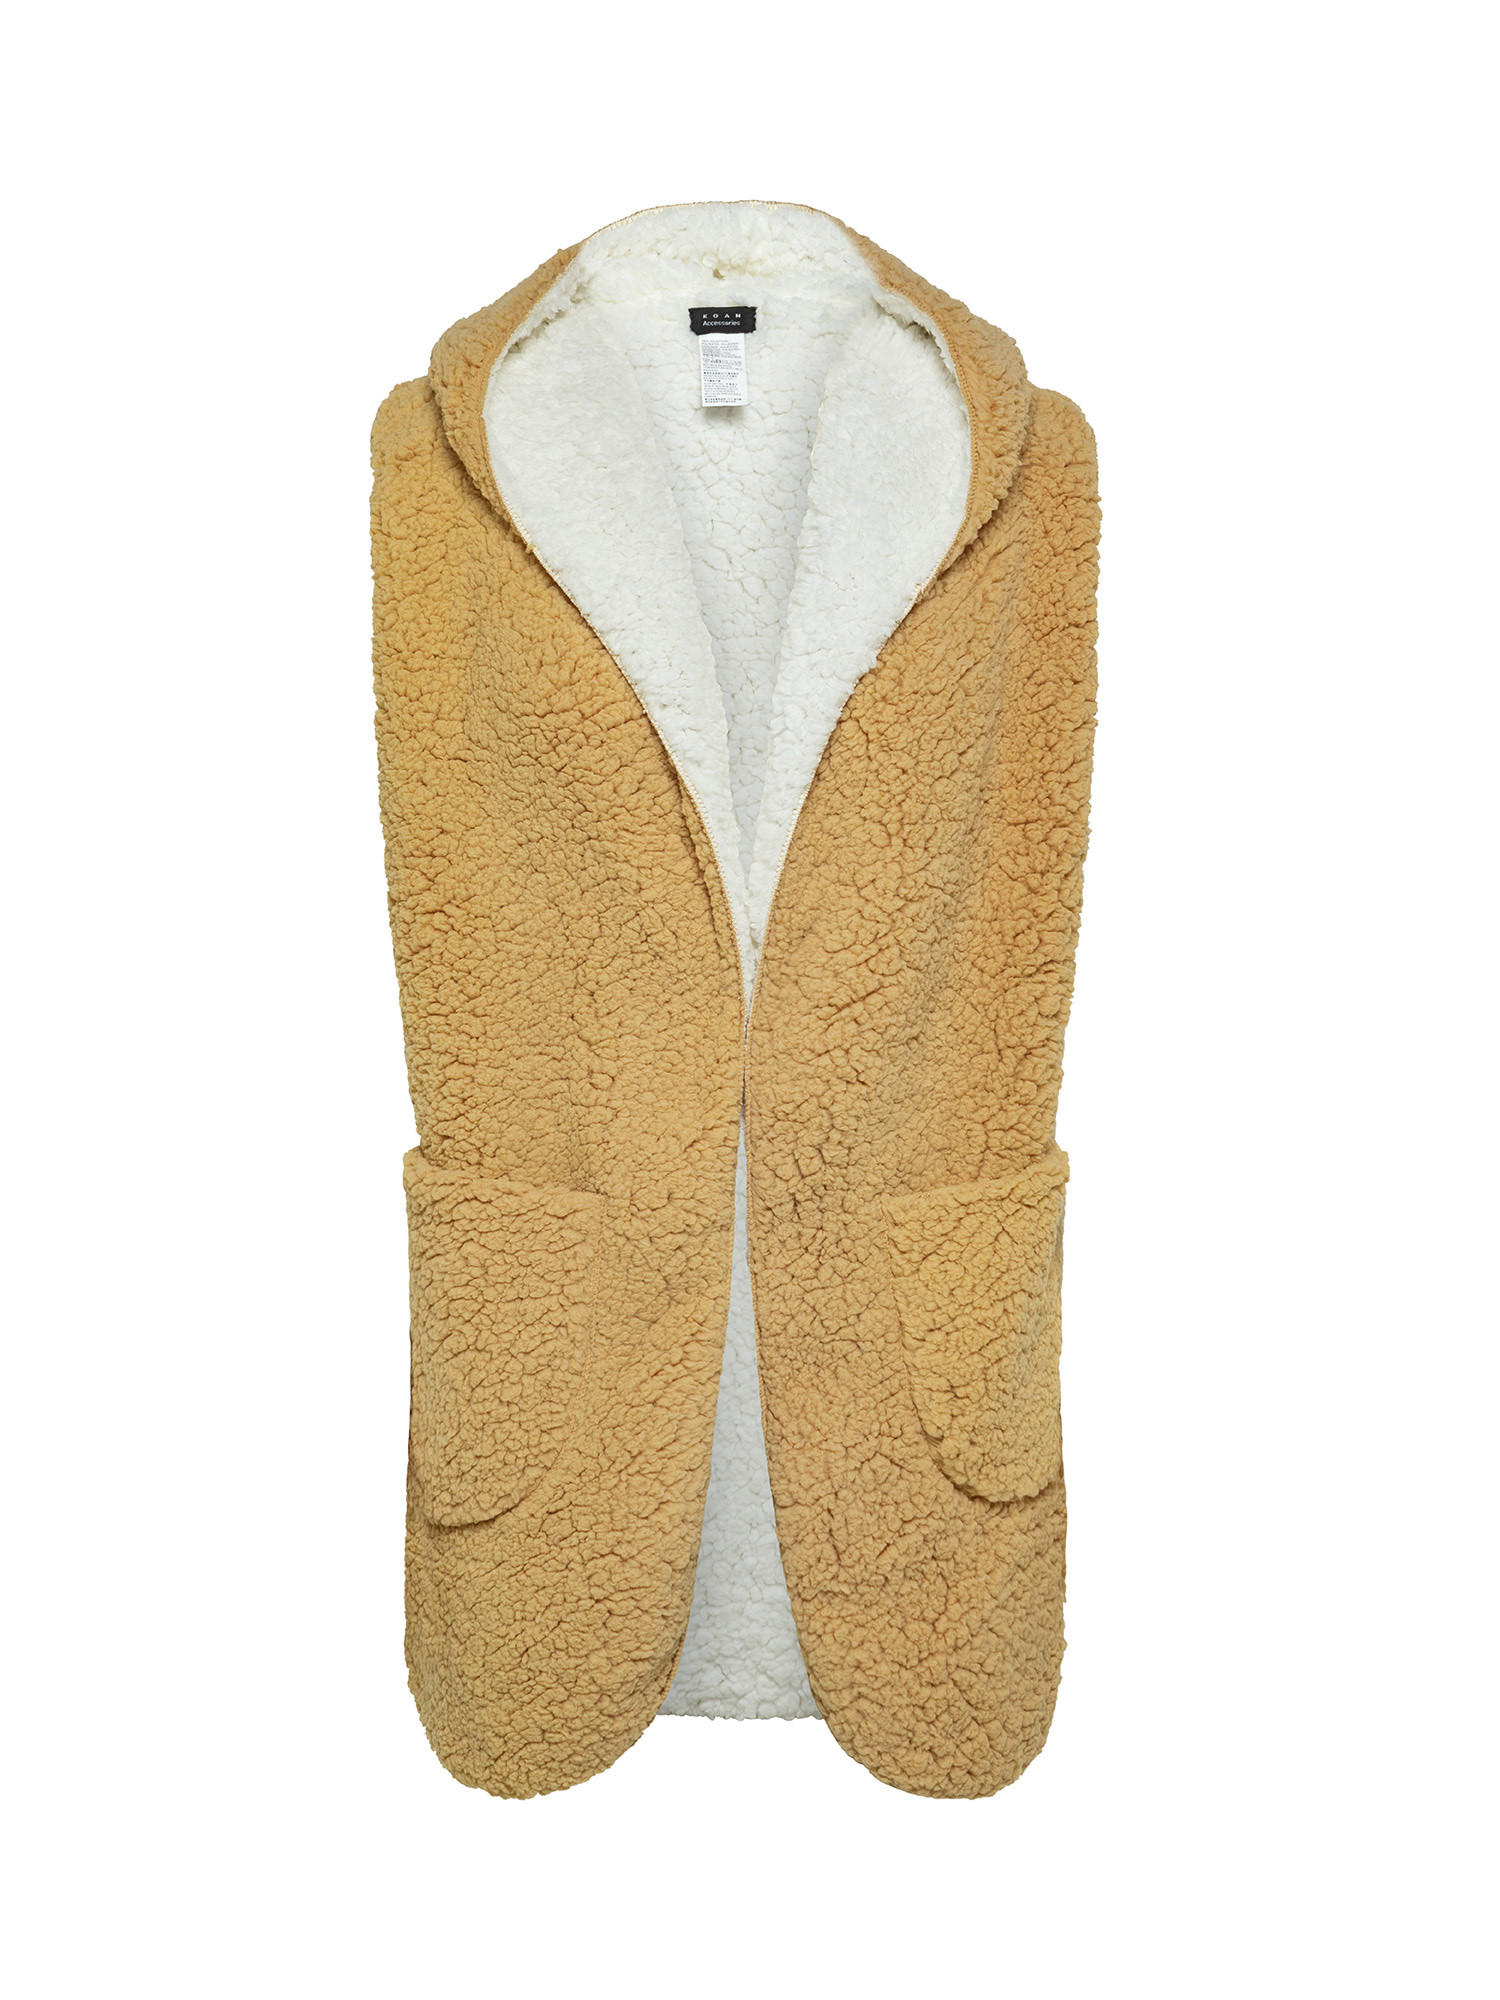 Koan - Faux fur vest with hood, White, large image number 0